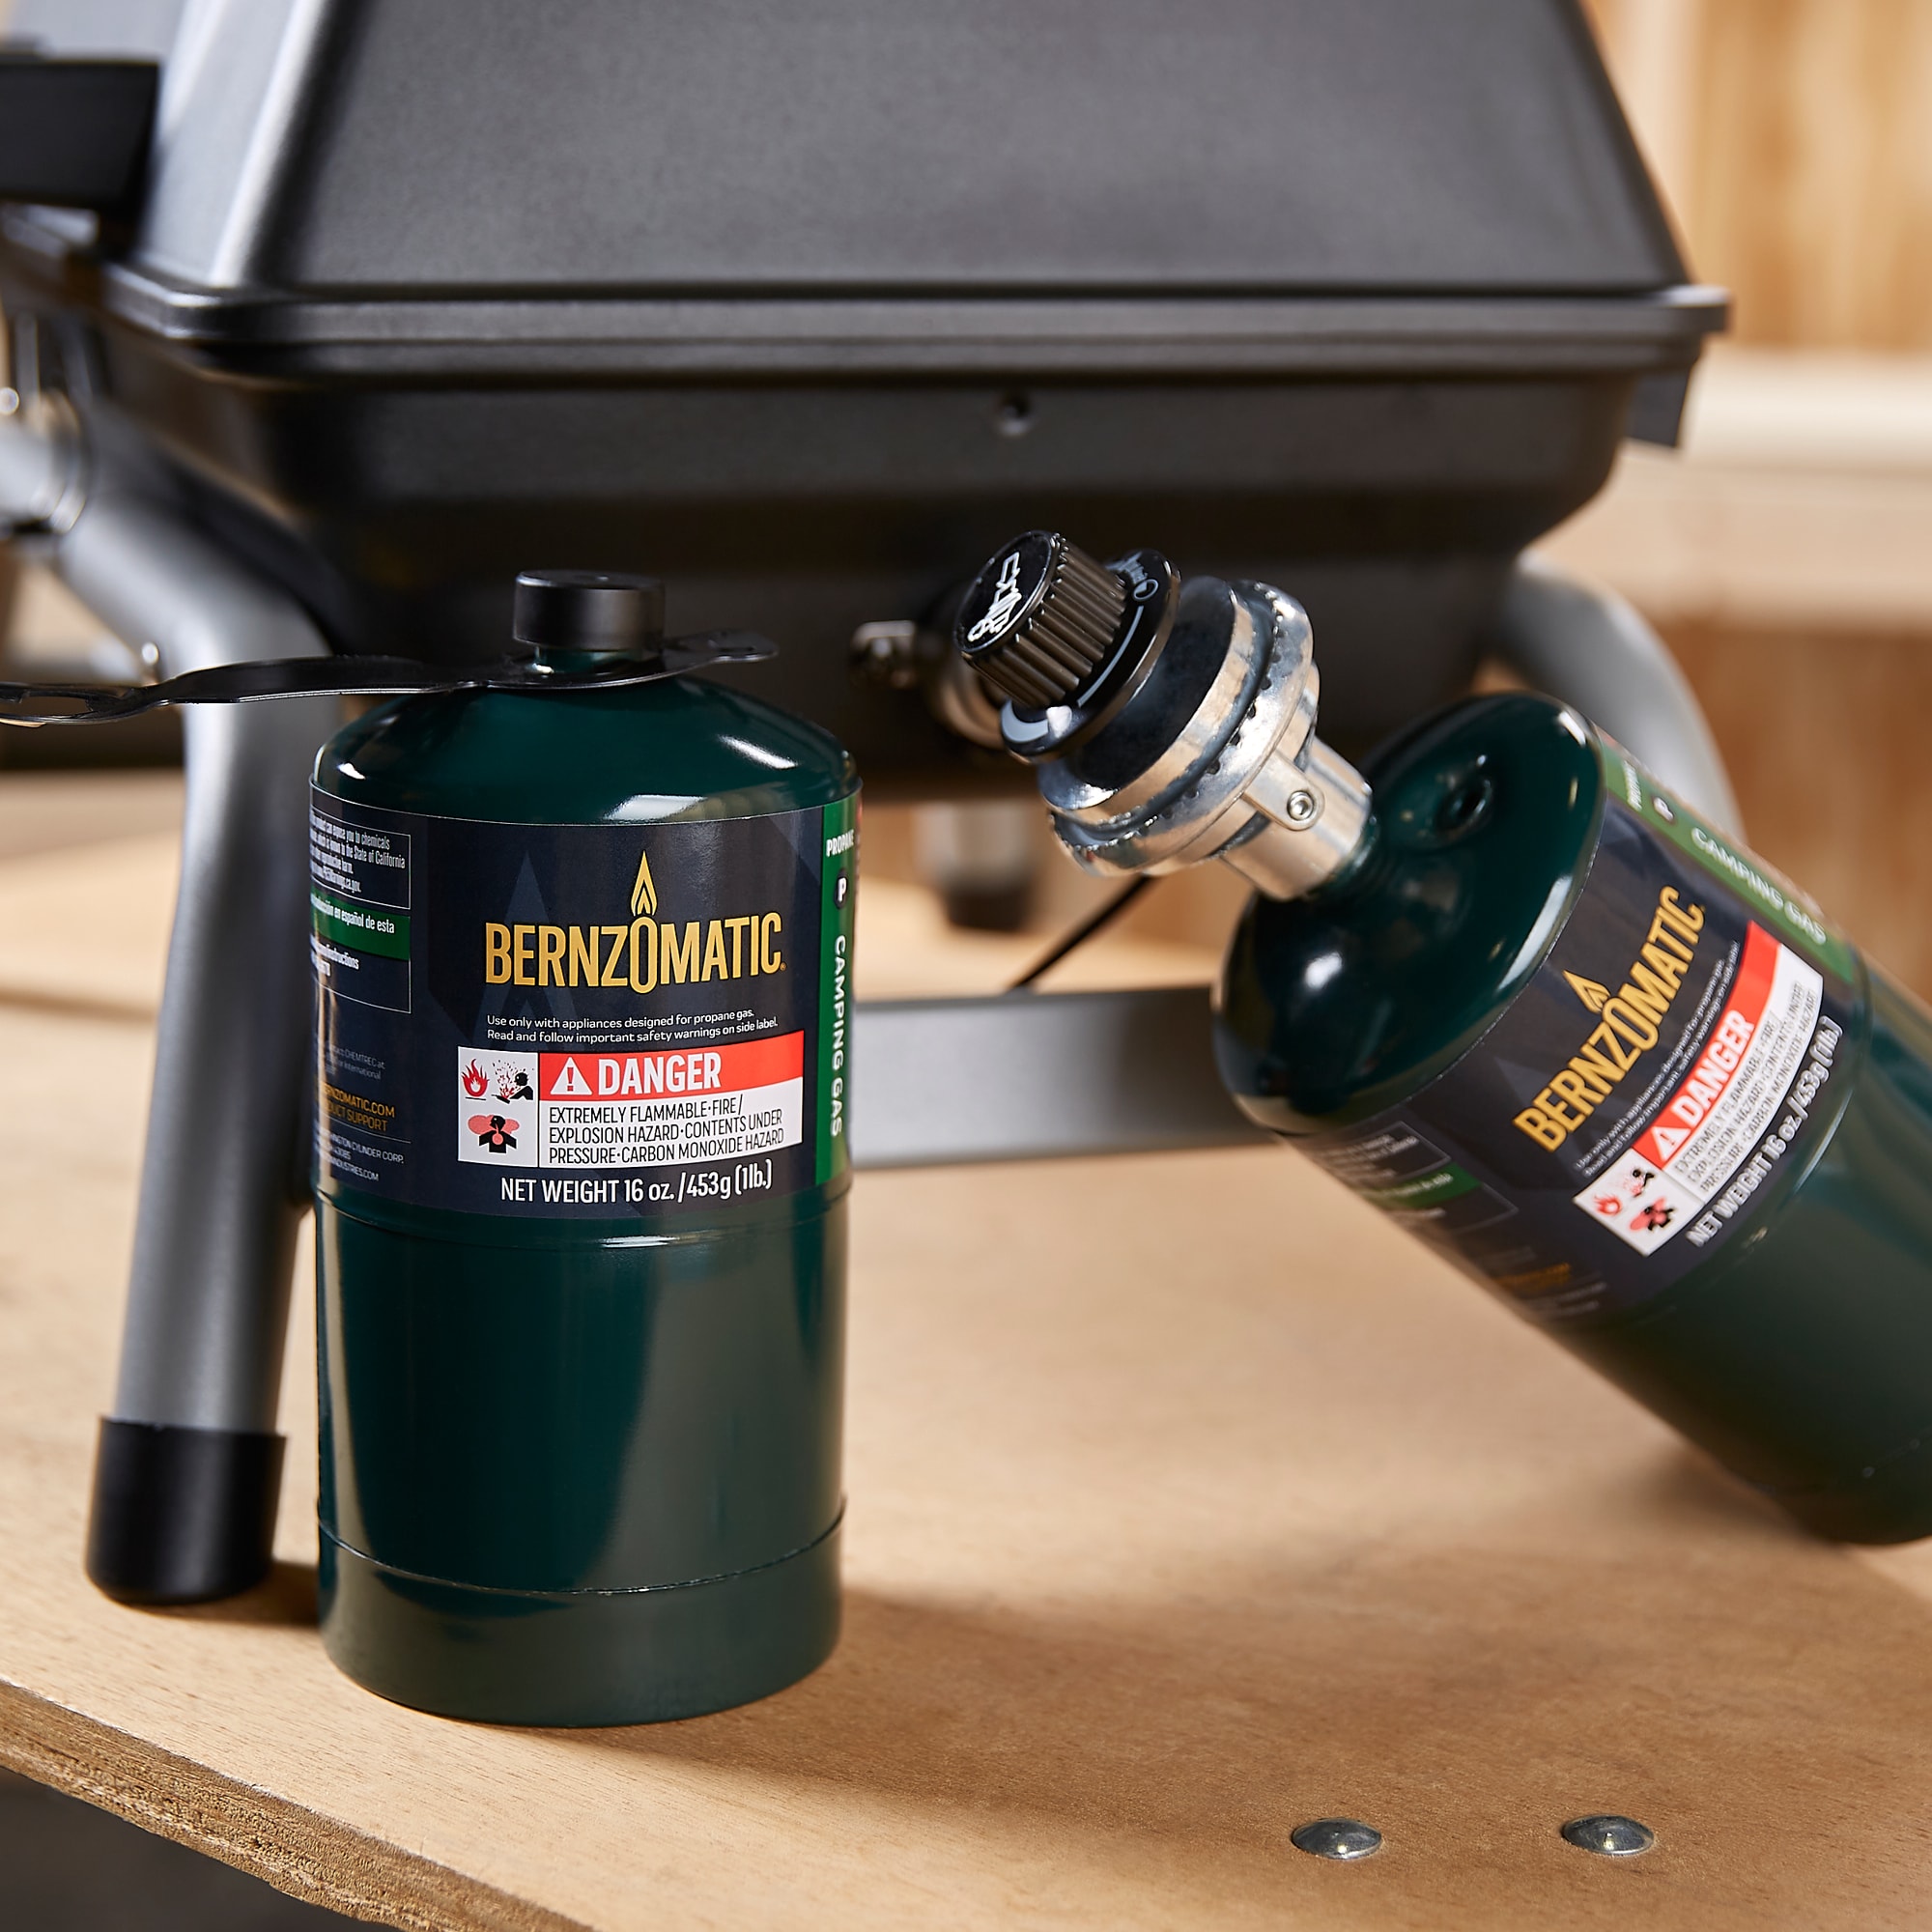 Bernzomatic 2-Pack Green Steel Propane Tanks 8x8x4 Inches Pre-Filled  Lightweight Portable Fuel for Appliances, Grills, Lanterns in the Propane  Tanks & Accessories department at